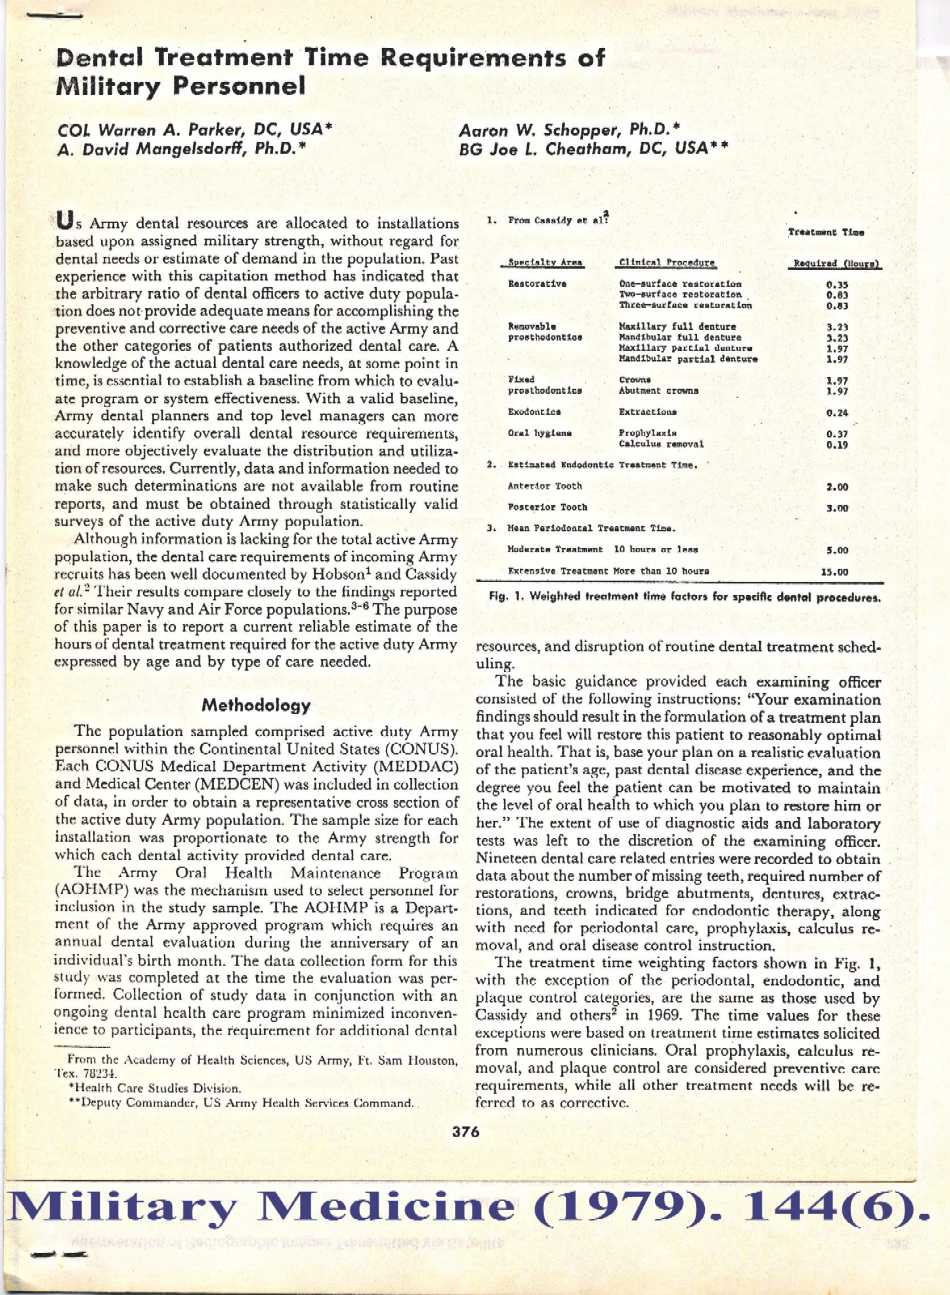 Military Medicine (1979): Dental treatment time requirements of military personnel